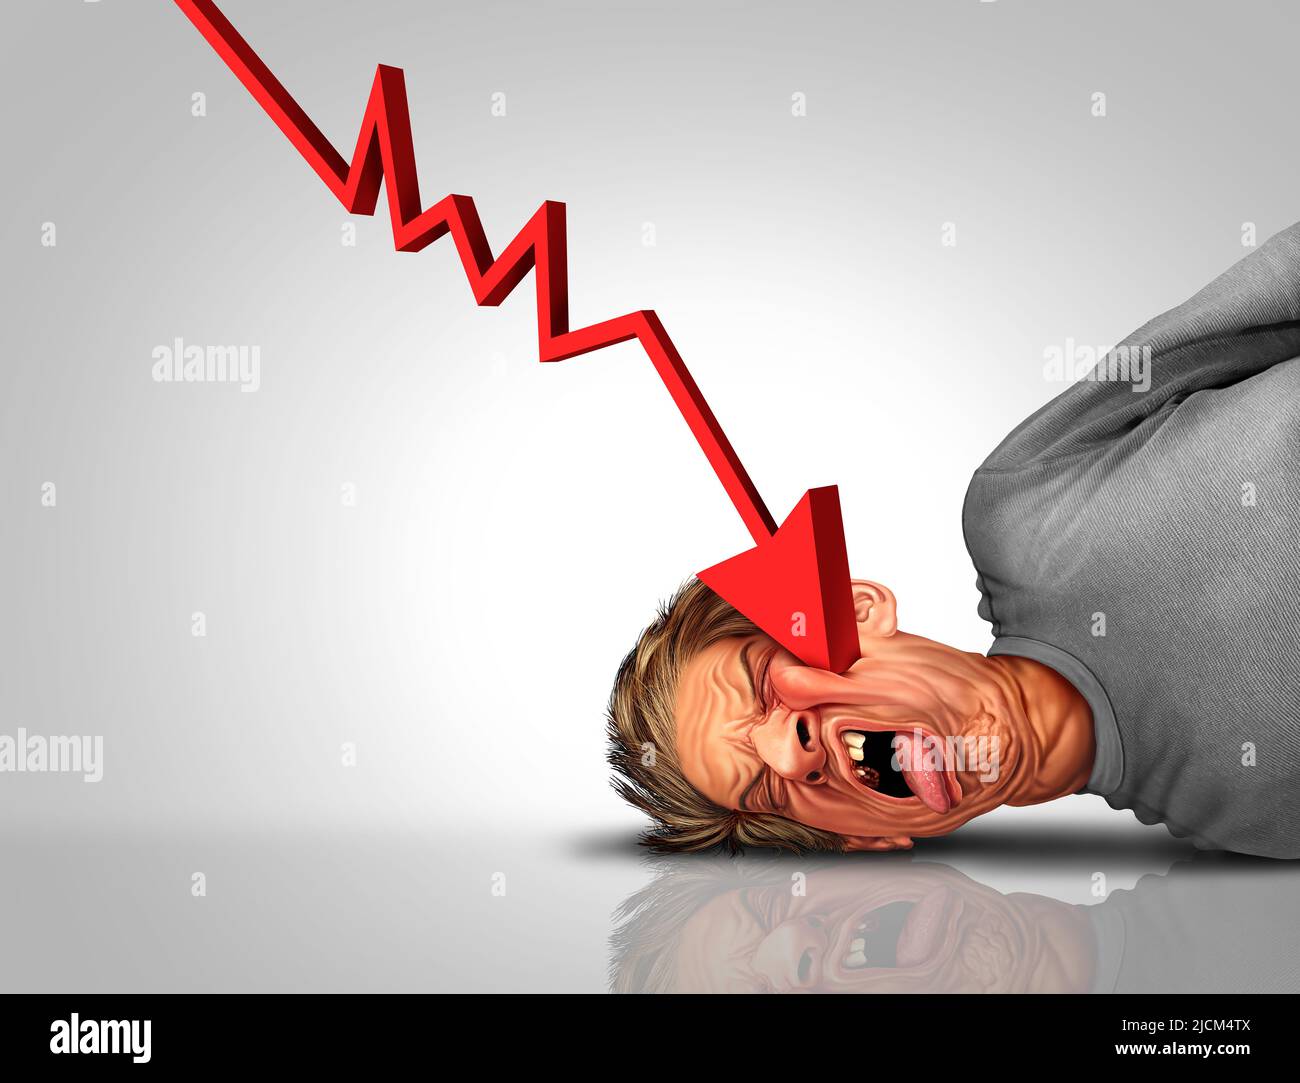 Recession pain and painful economic markets as a downward arrow financialy hitting a consumer. Stock Photo